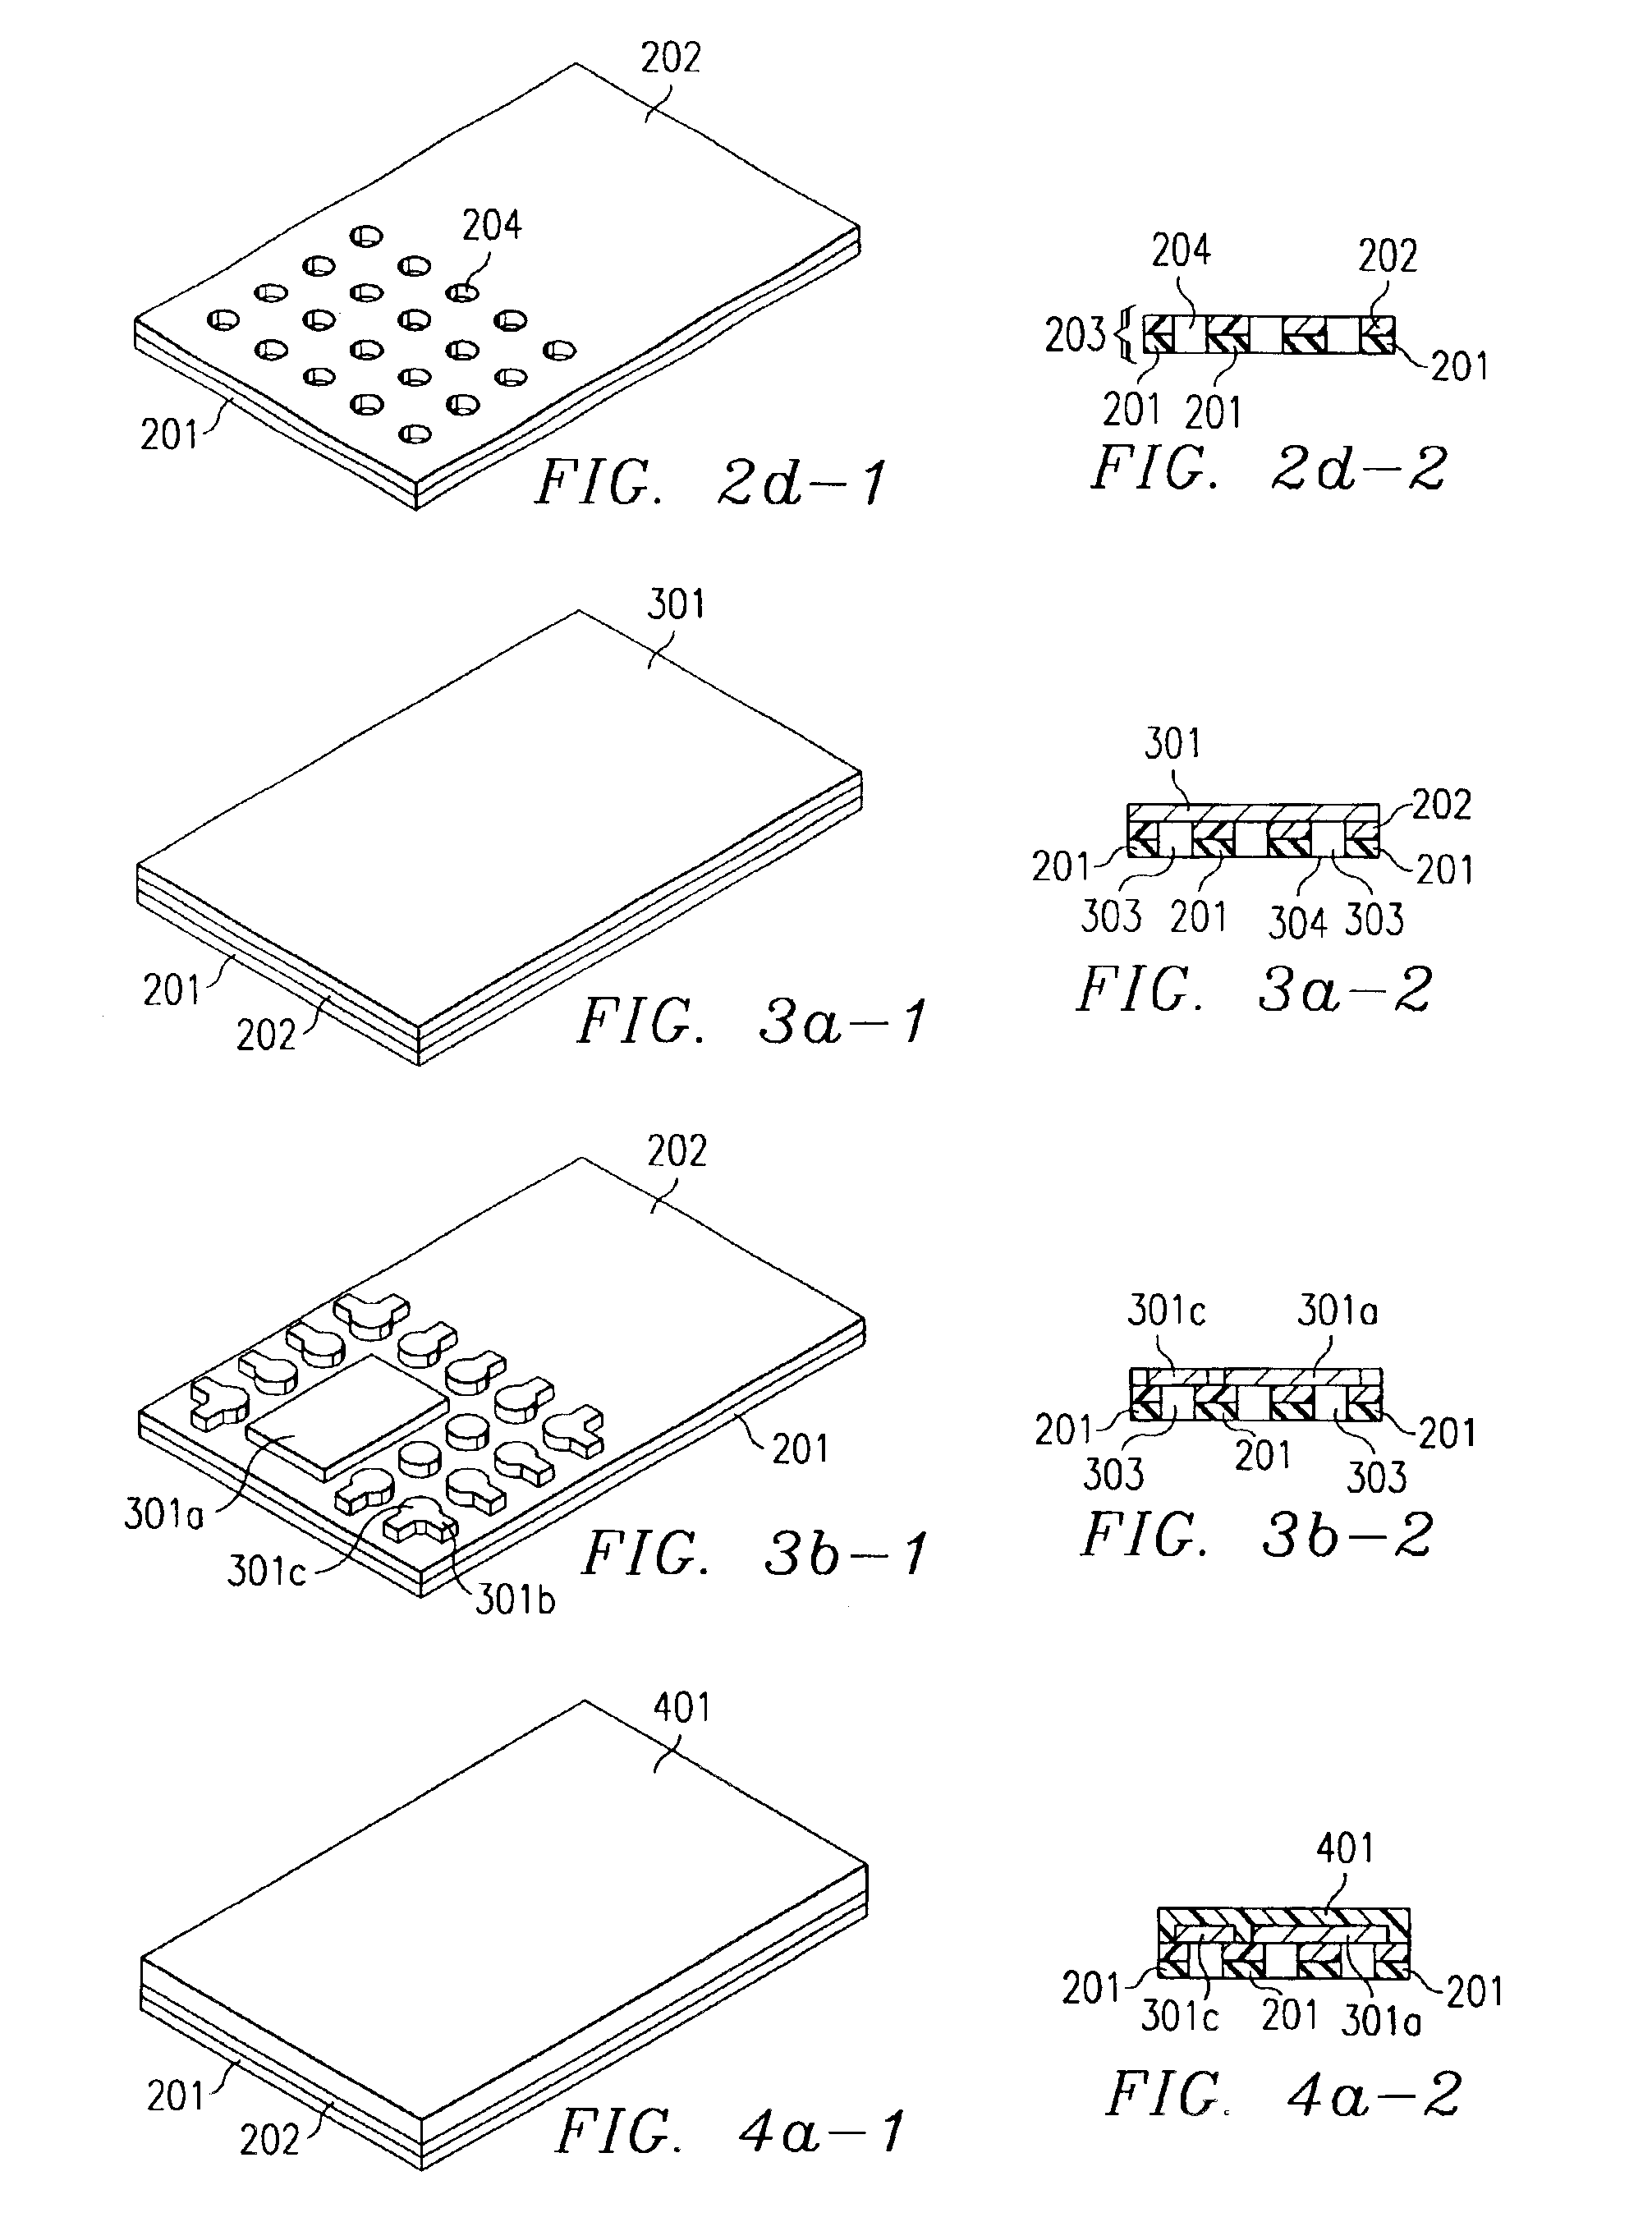 Plastic chip-scale package having integrated passive components